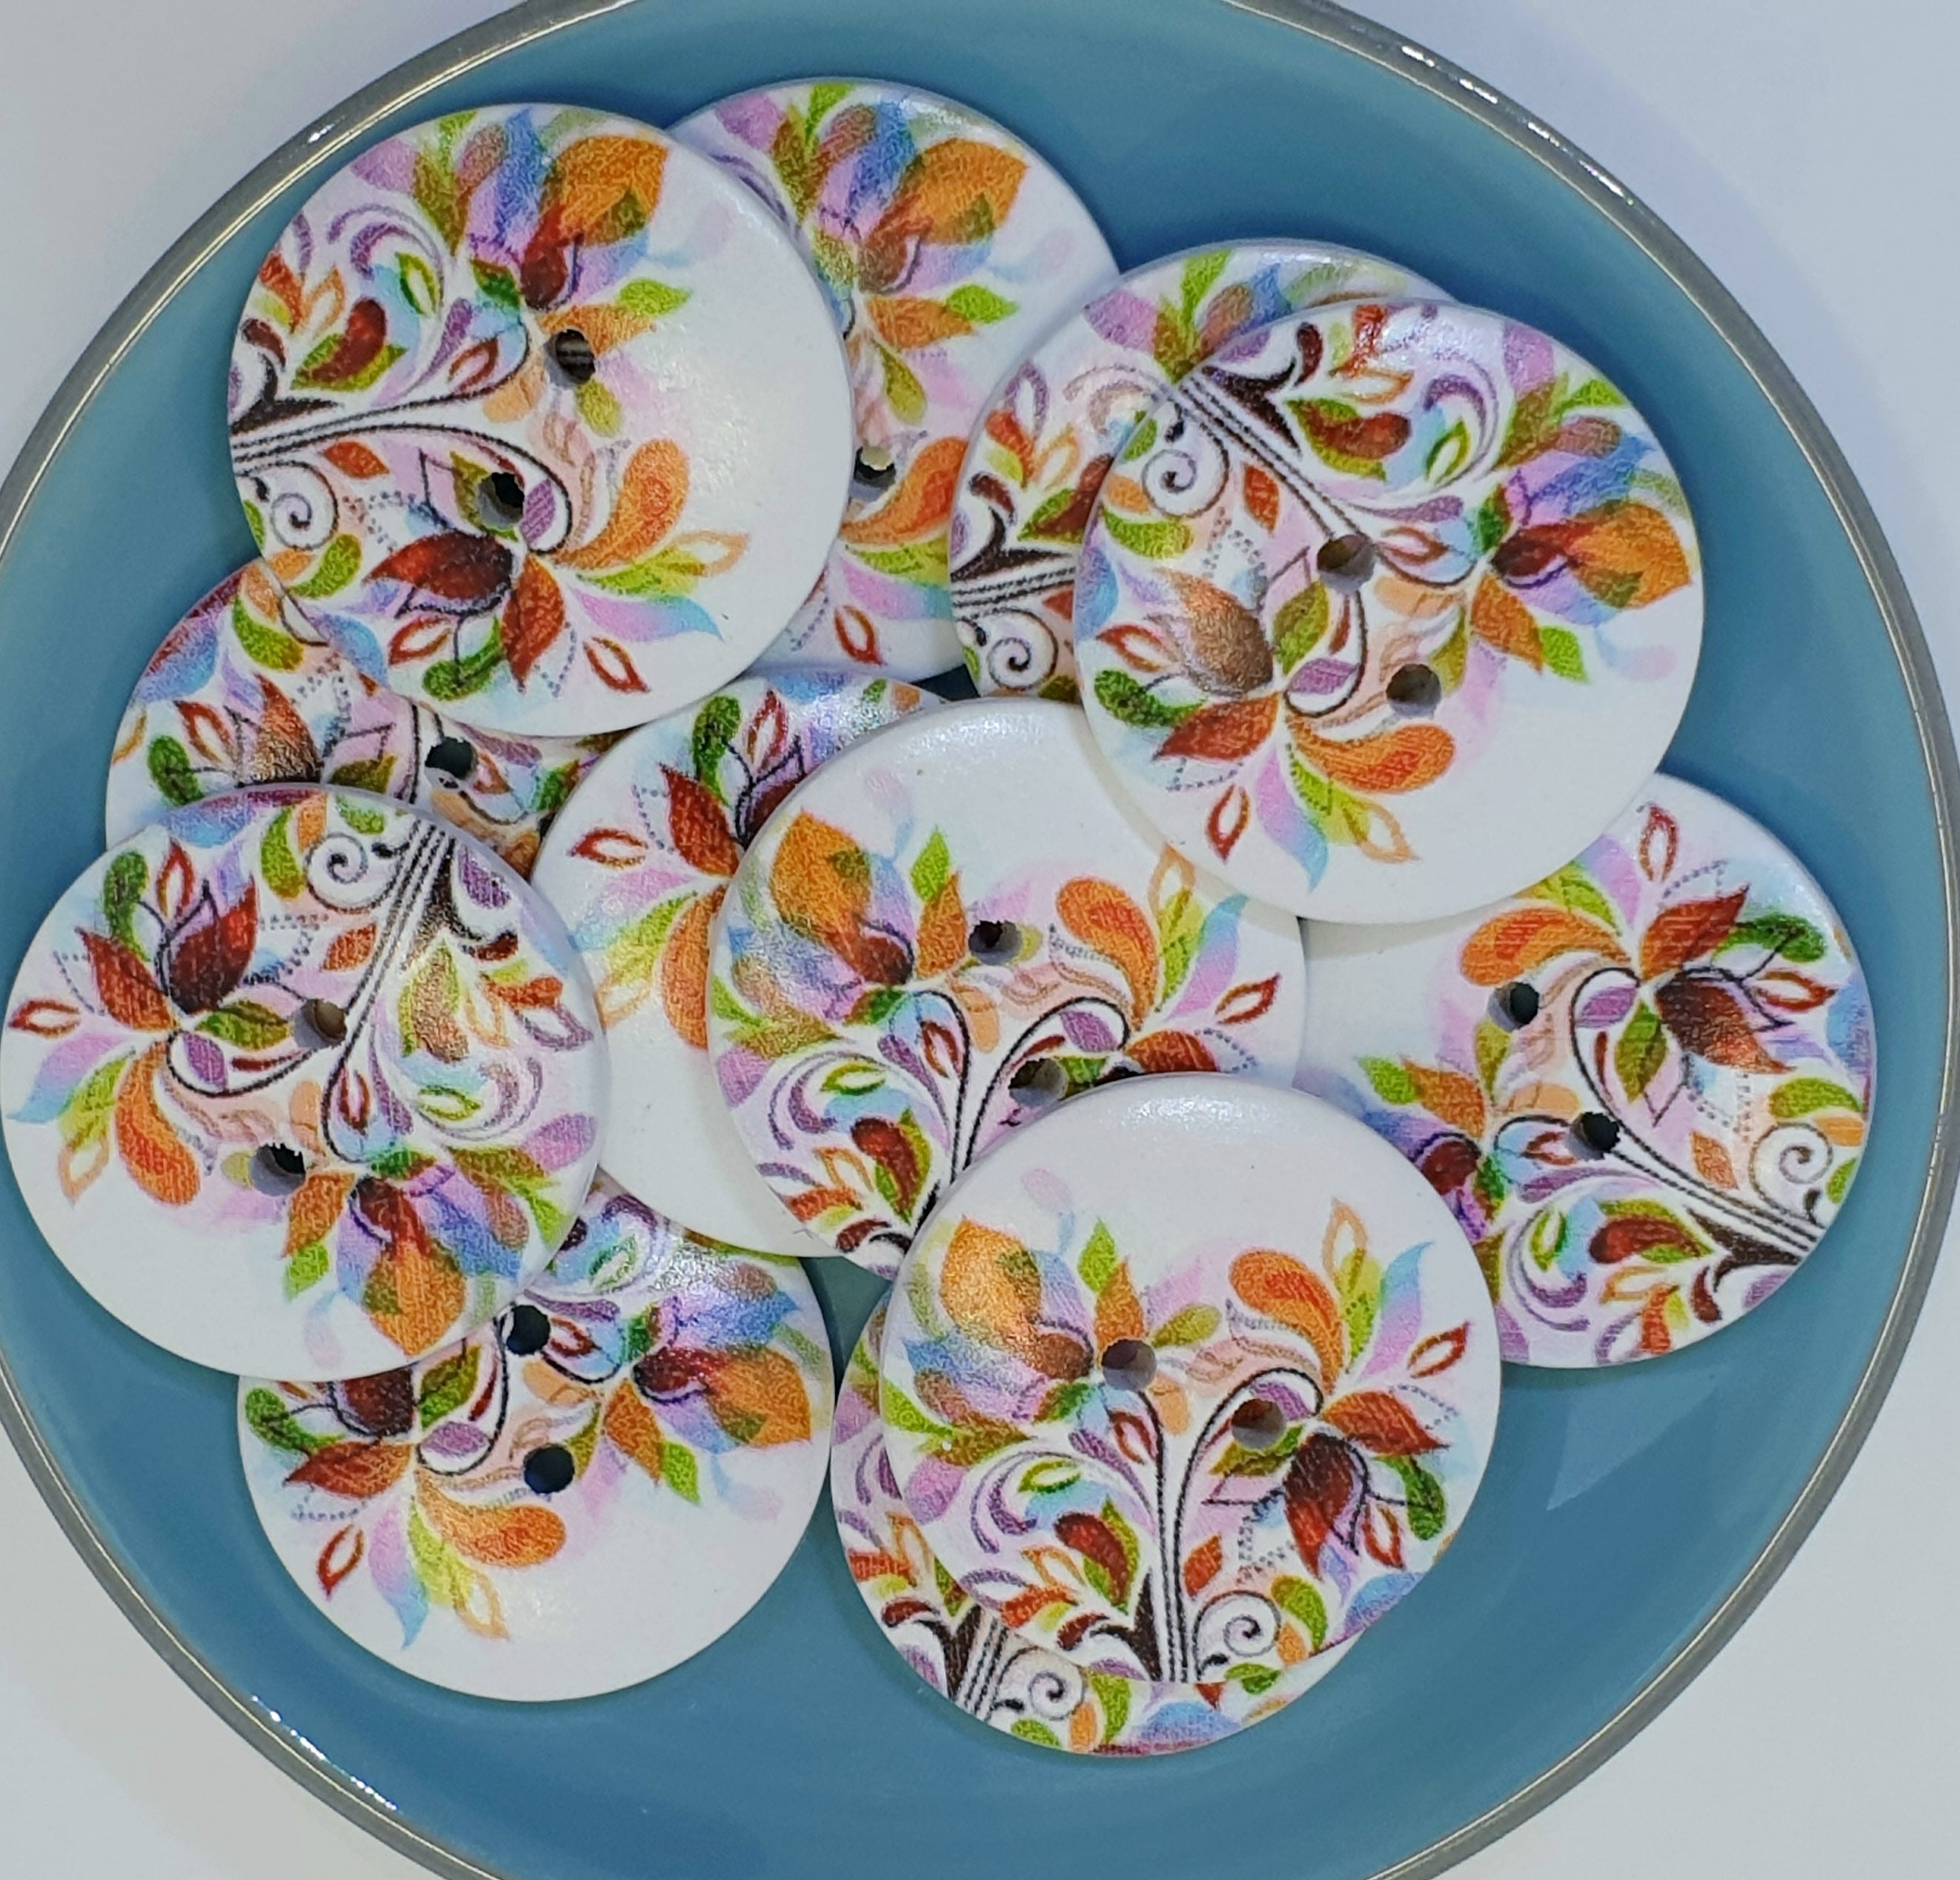 MajorCrafts 16pcs 30mm White & Orange Fiery Flower Pattern 2 Holes Large Wooden Sewing Buttons